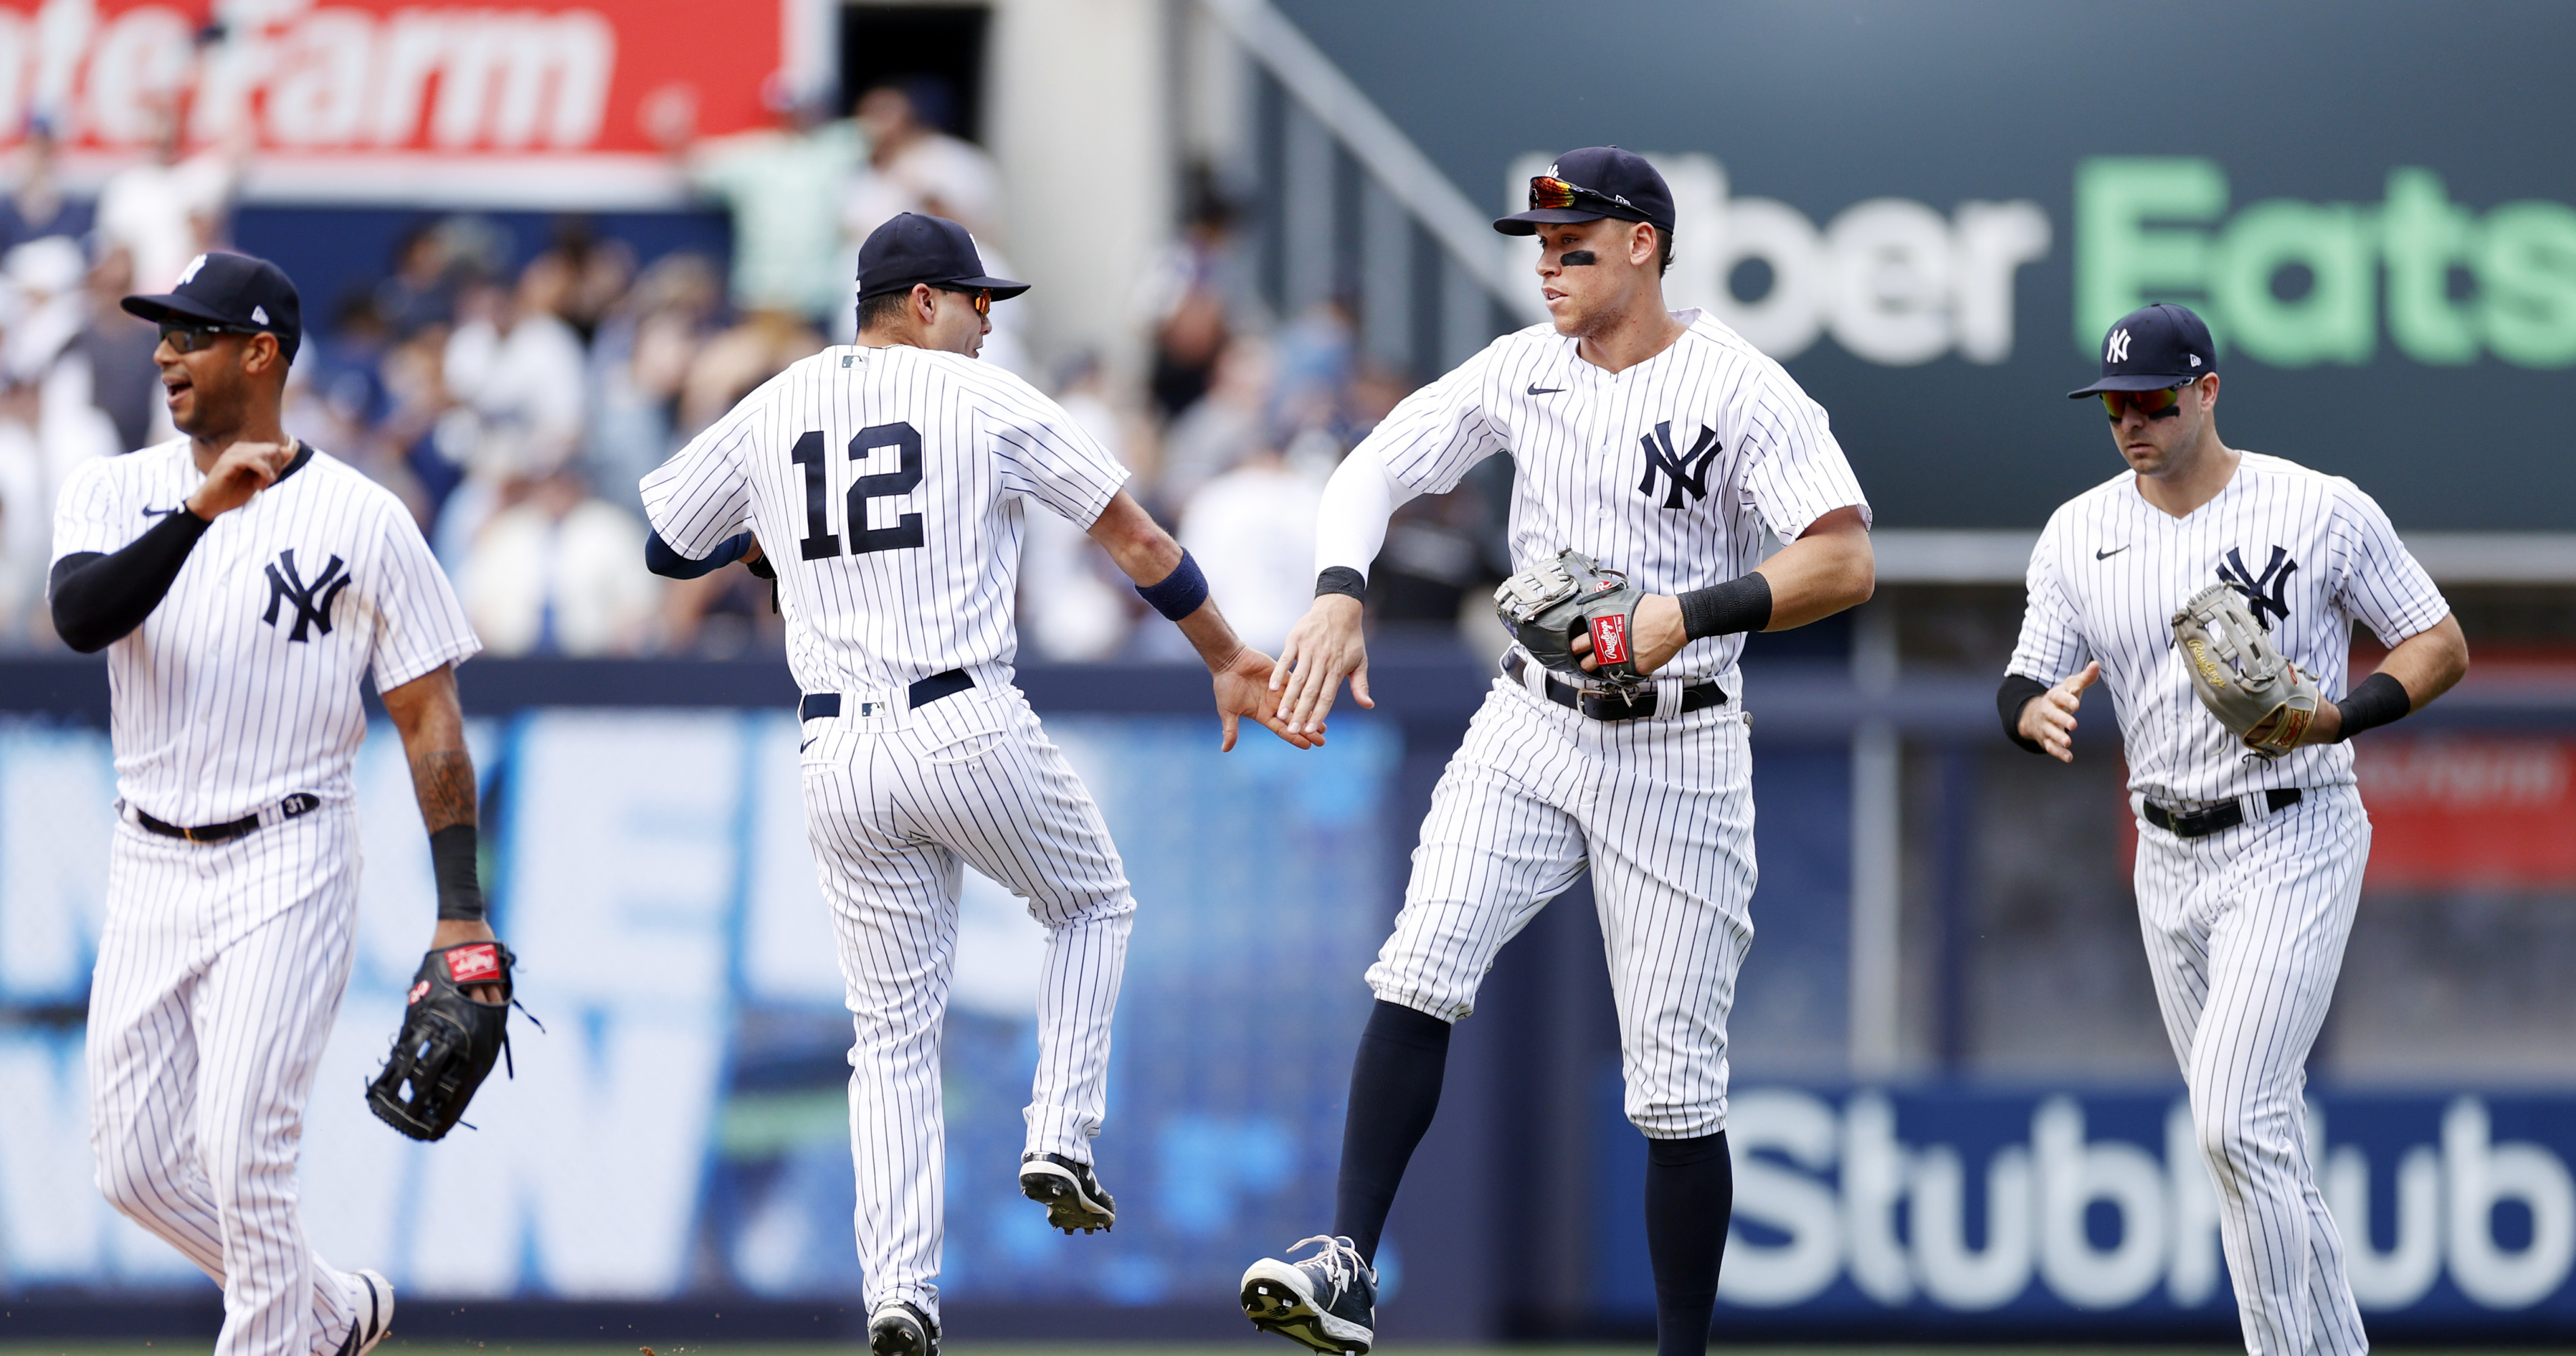 Yankees' inconsistent offense shut down in loss to Marlins